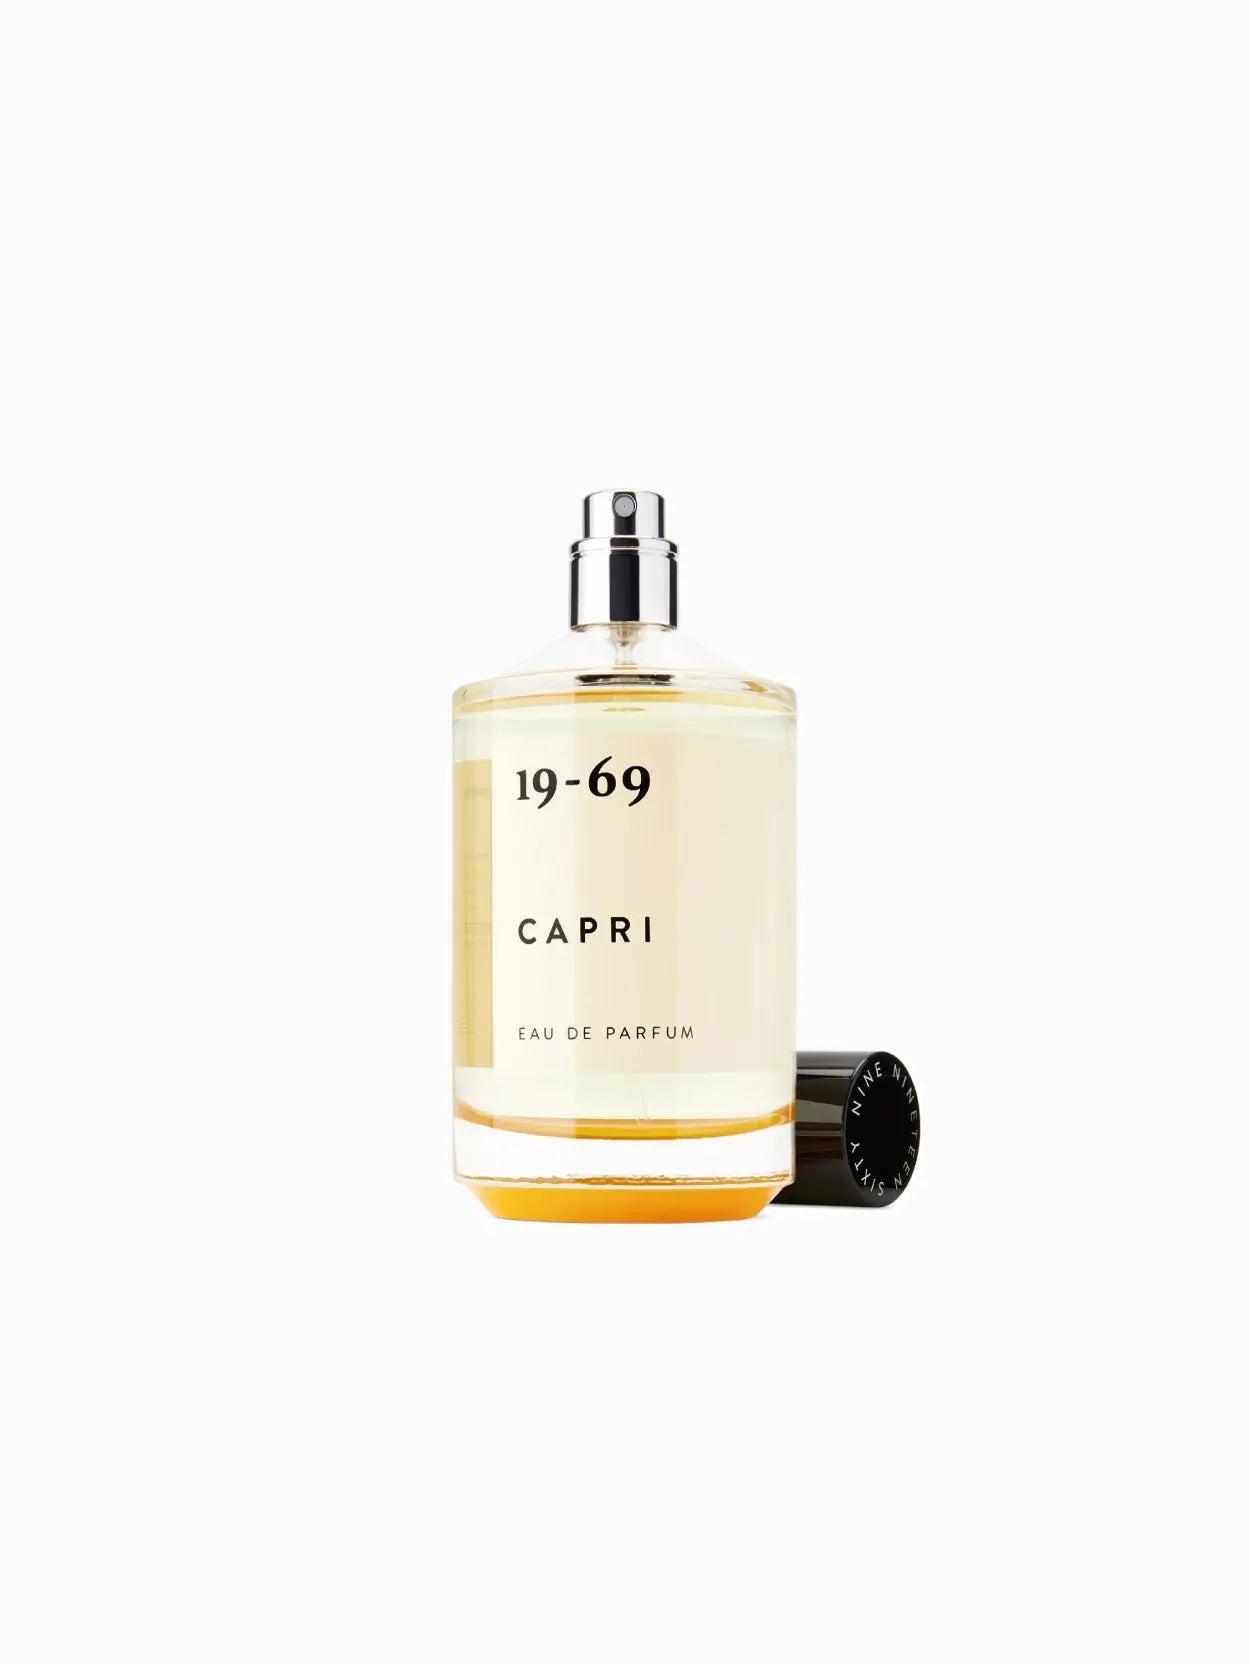 A clear glass bottle of Capri 100ml by 19-69 with a black cap, available at Bassalstore. The fragrance name "Capri 100ml" and "19-69" text is printed on the front in black, showcasing a yellow-tinted liquid inside.